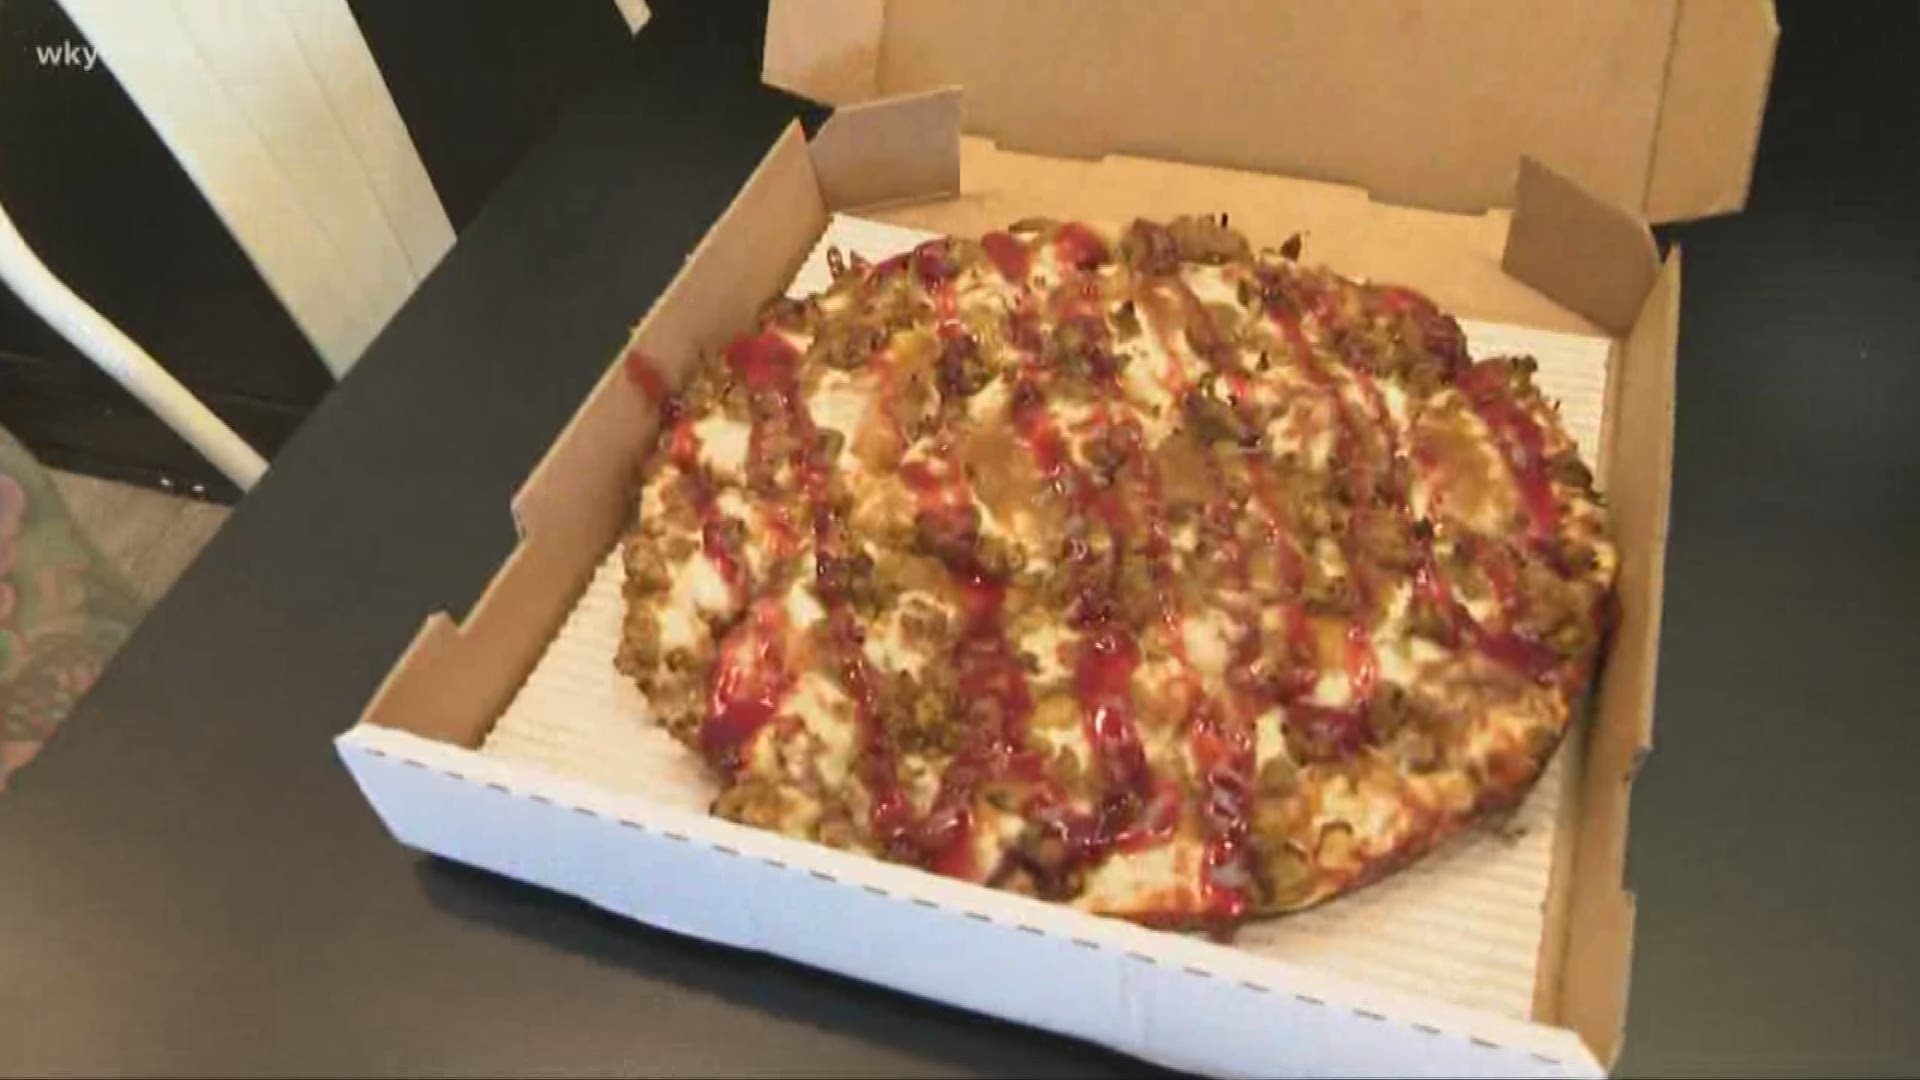 This Ohio restaurant makes pizza with Thanksgiving foods